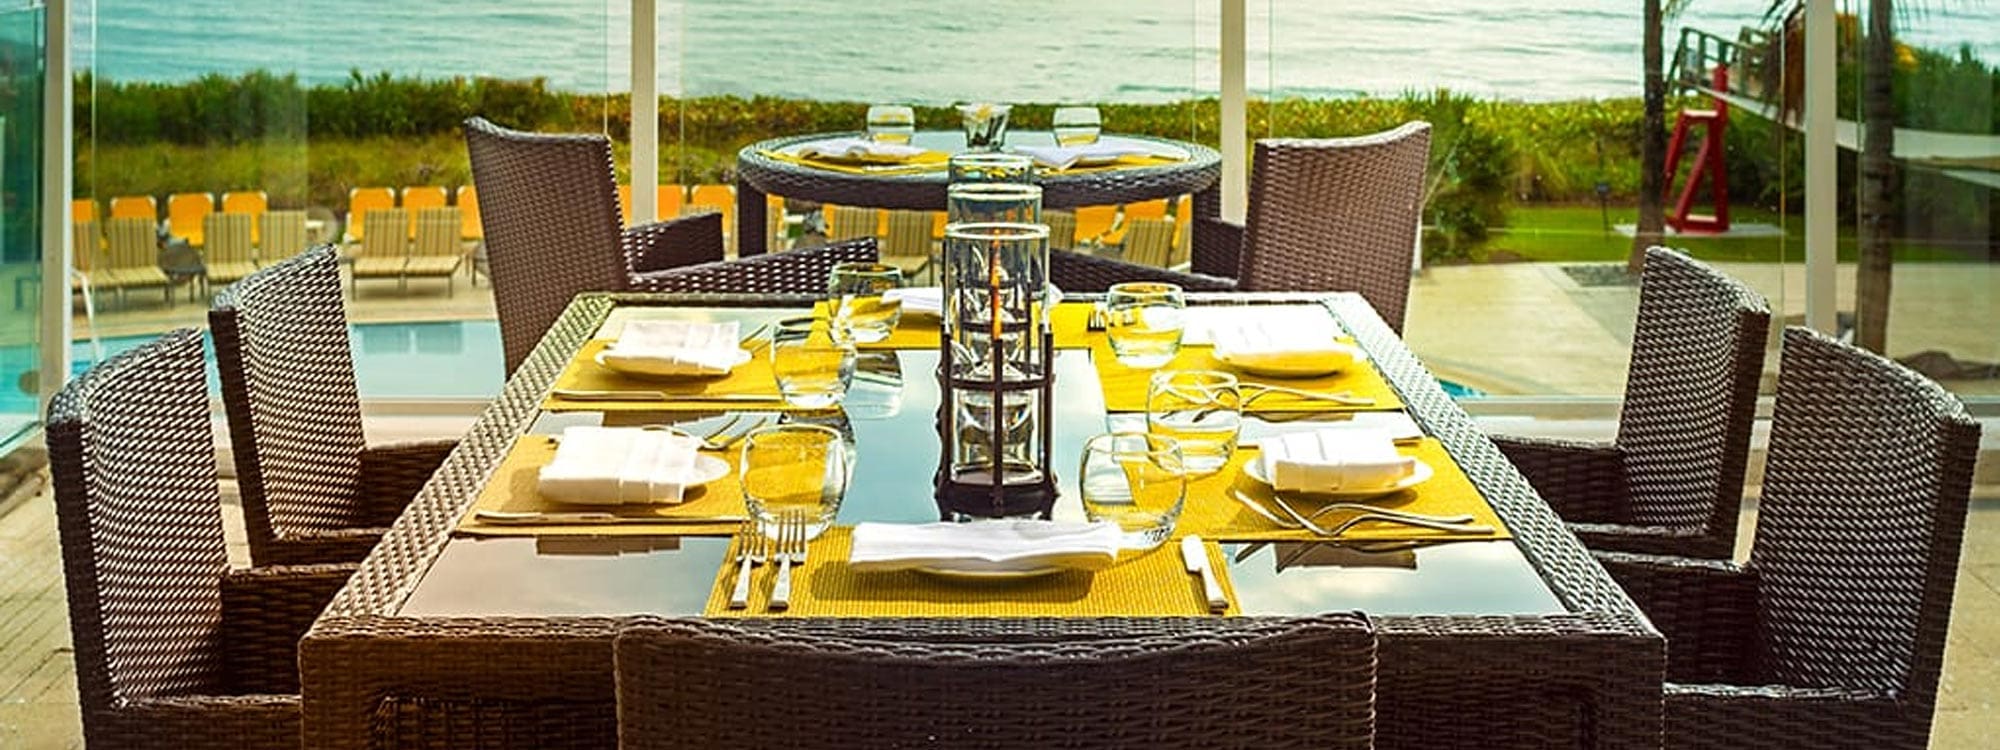 Image of exterior hospitality furniture from Encompass shown at Boca Beach Club, Florida